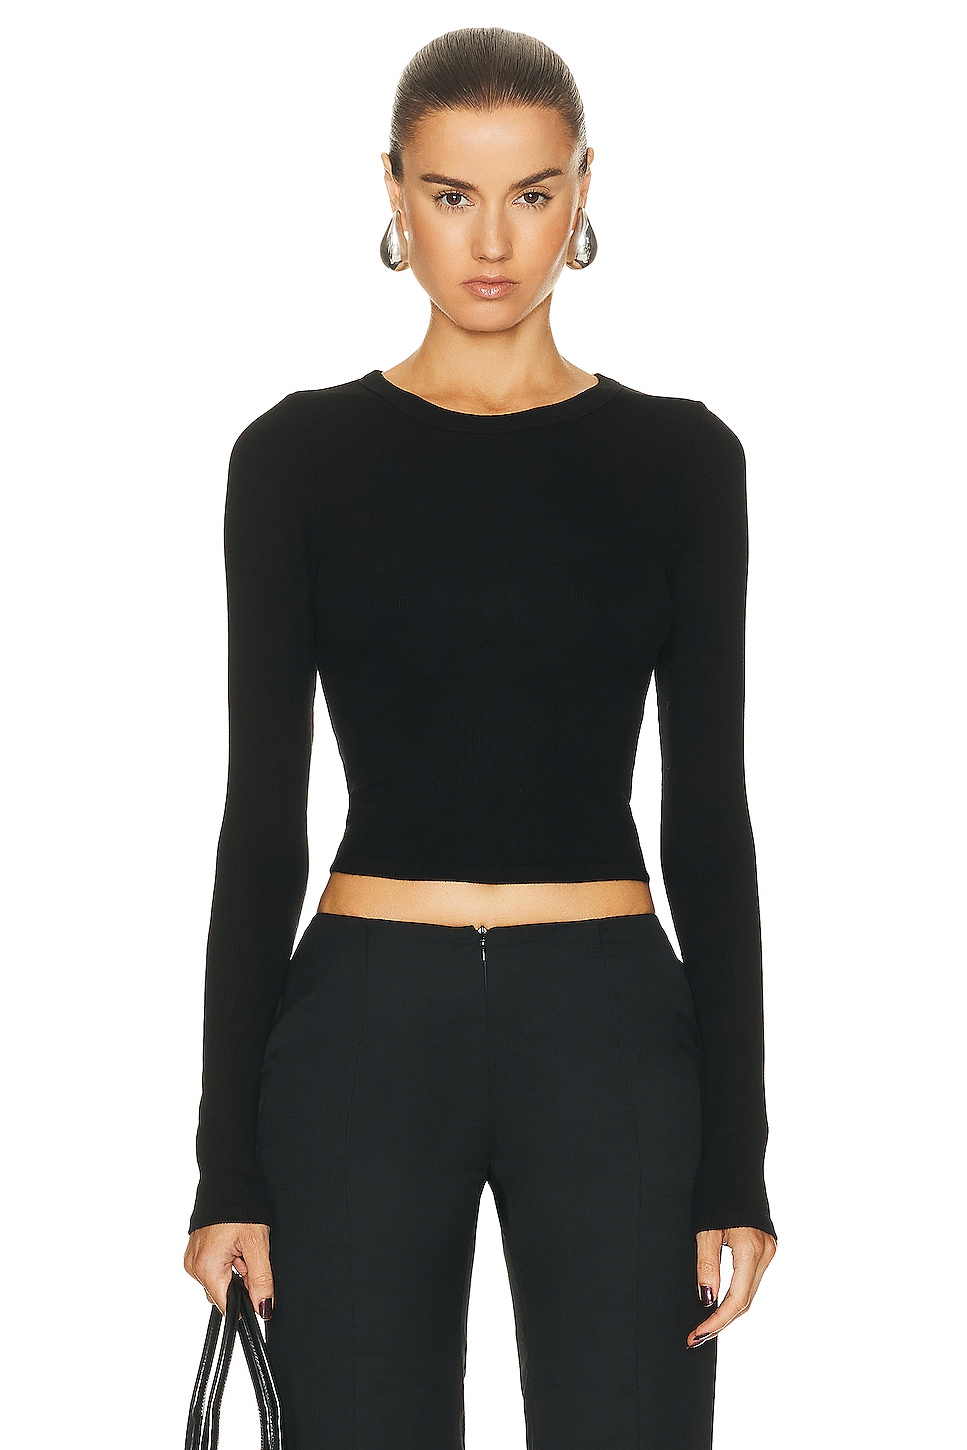 Image 1 of Enza Costa Silk Knit Long Sleeve Tuck Top in Black